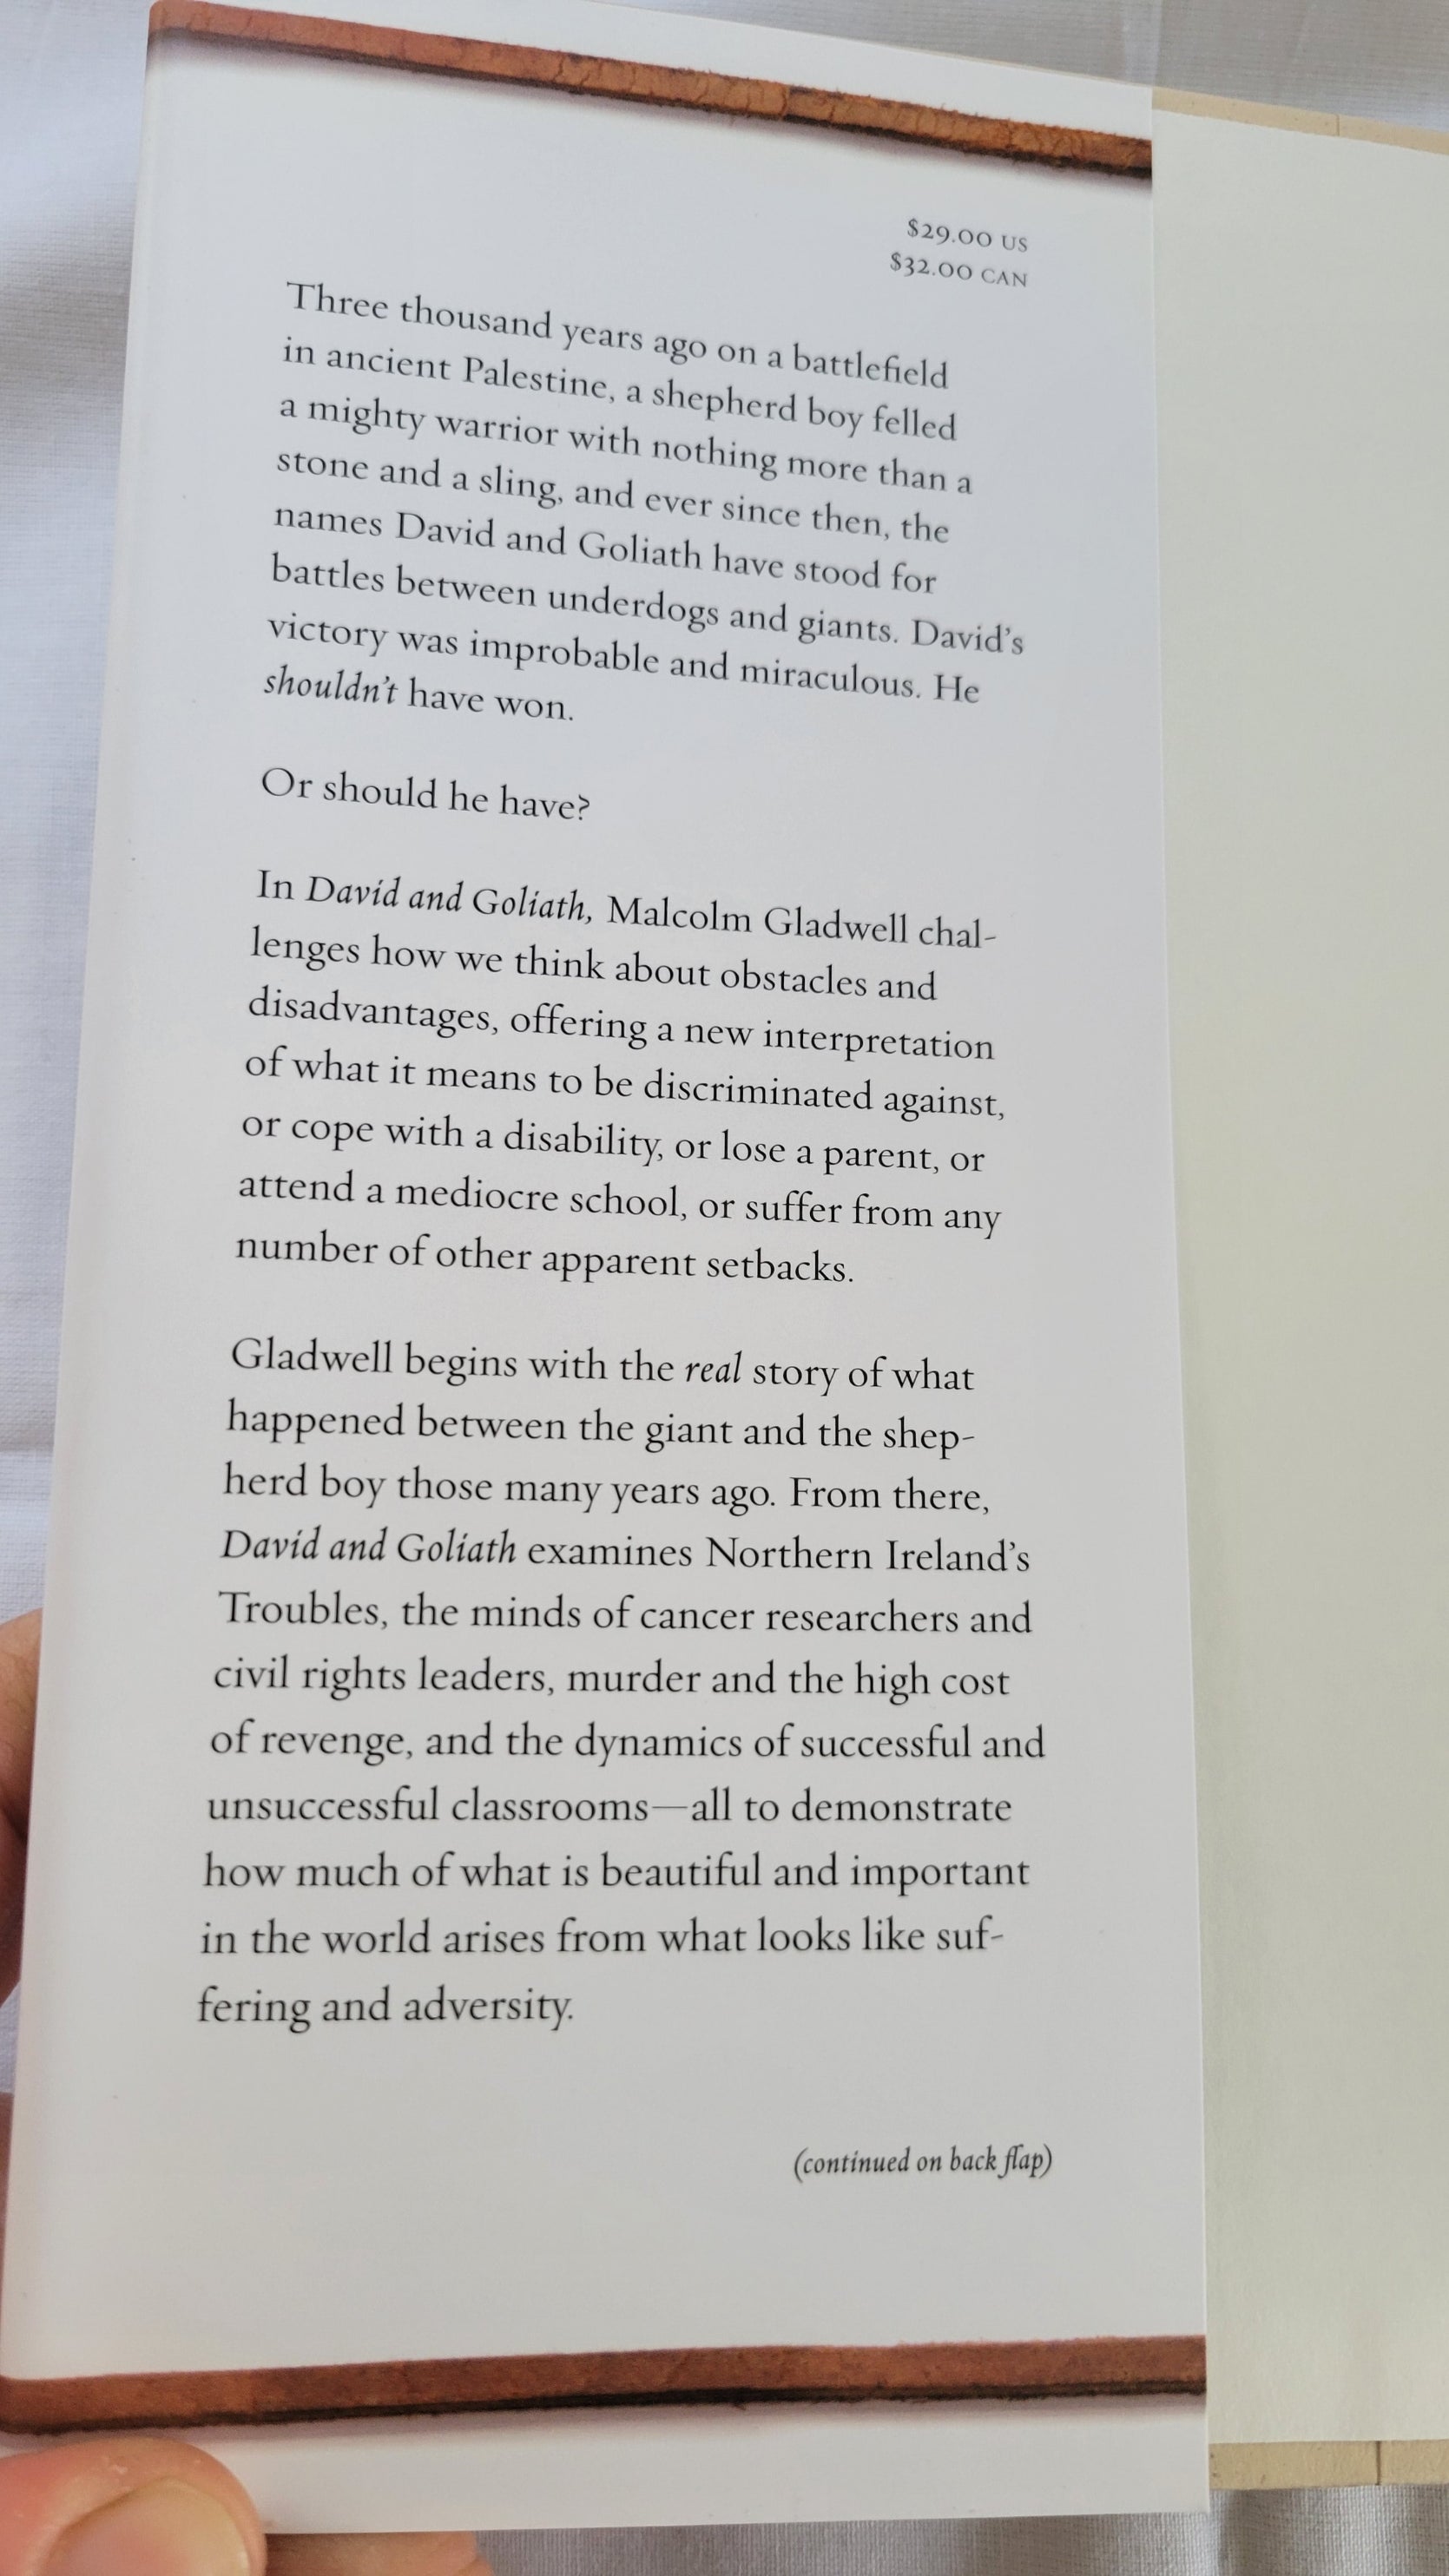 Used book David and Goliath: Underdogs, Misfits, and the Art of Battling Giants, written by Malcolm Gladwell.  View of jacket panel.